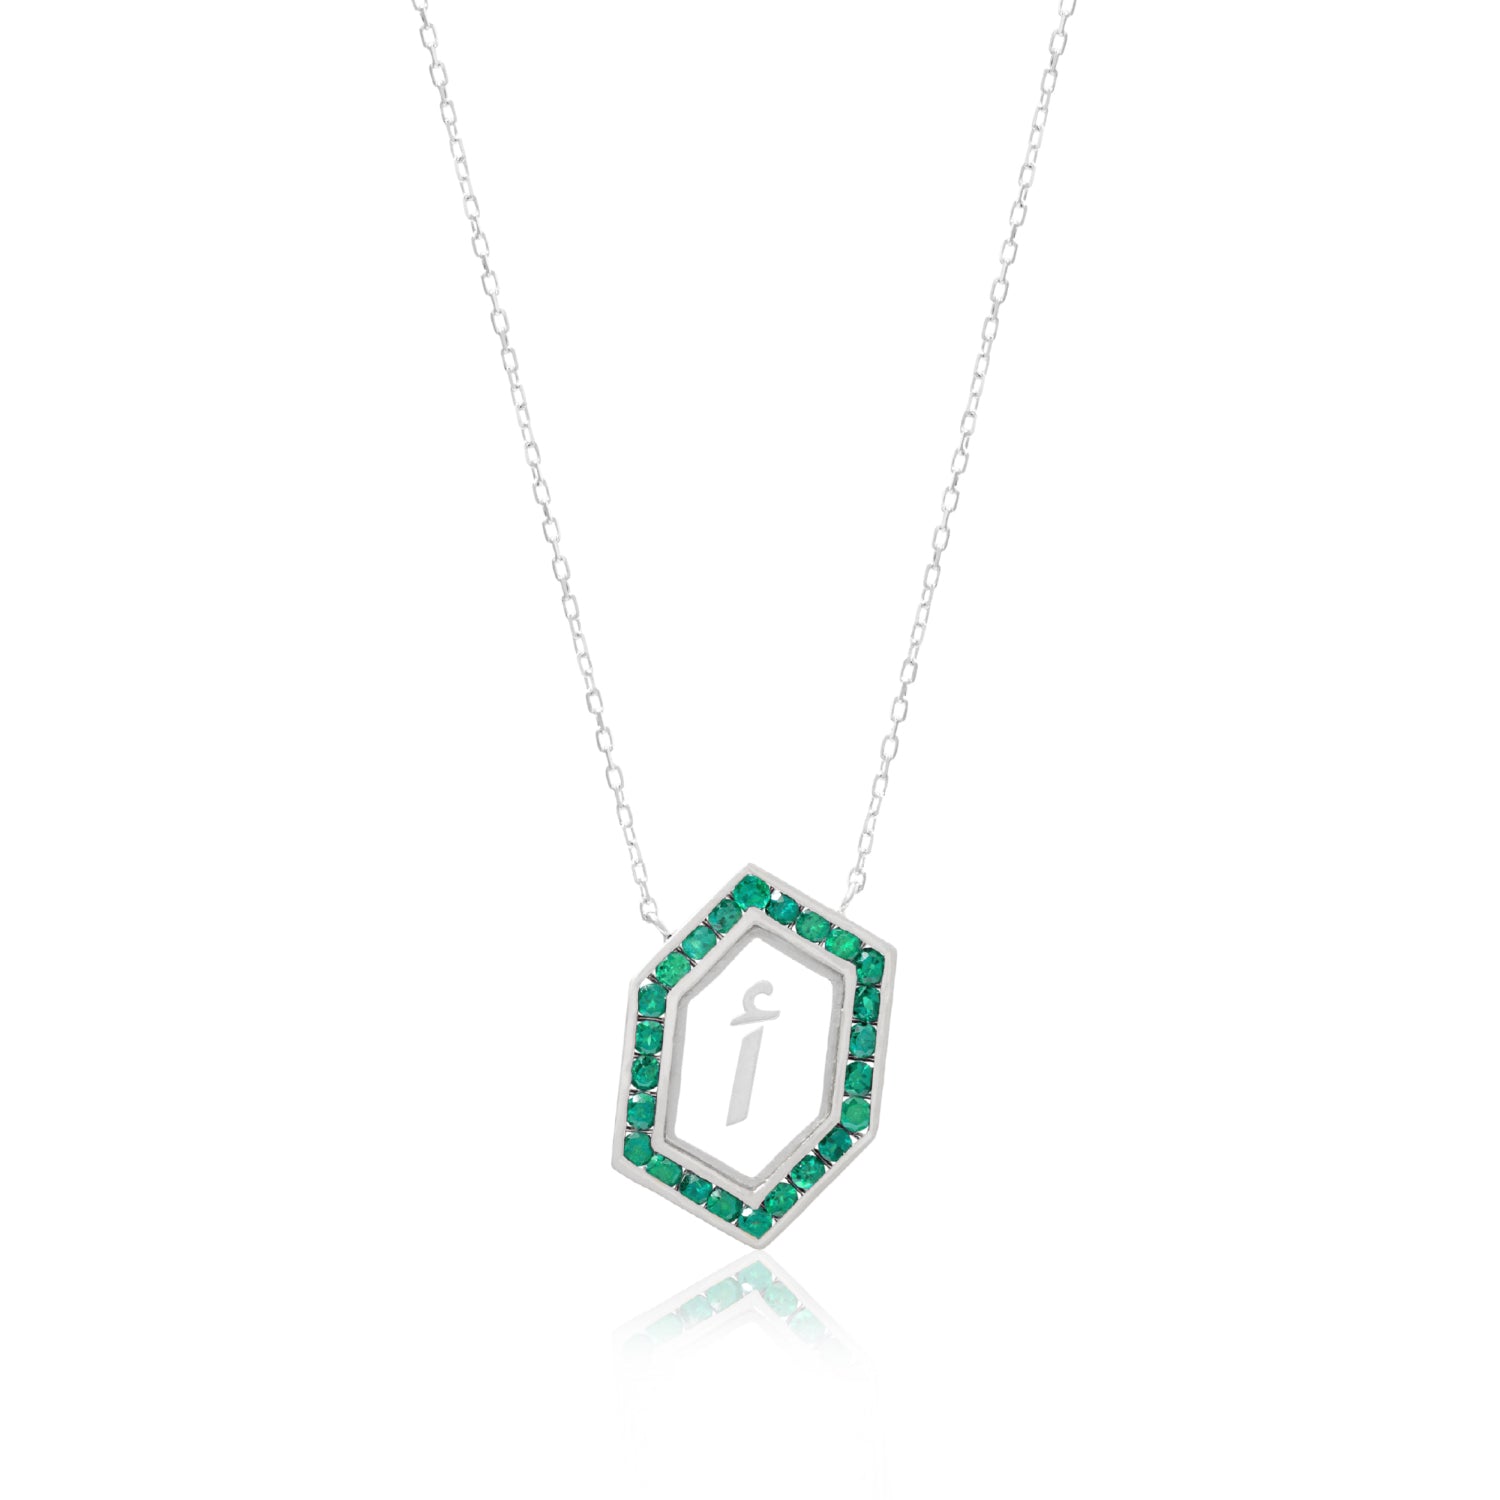 Qamoos 1.0 Letter أ Emerald Necklace in White Gold